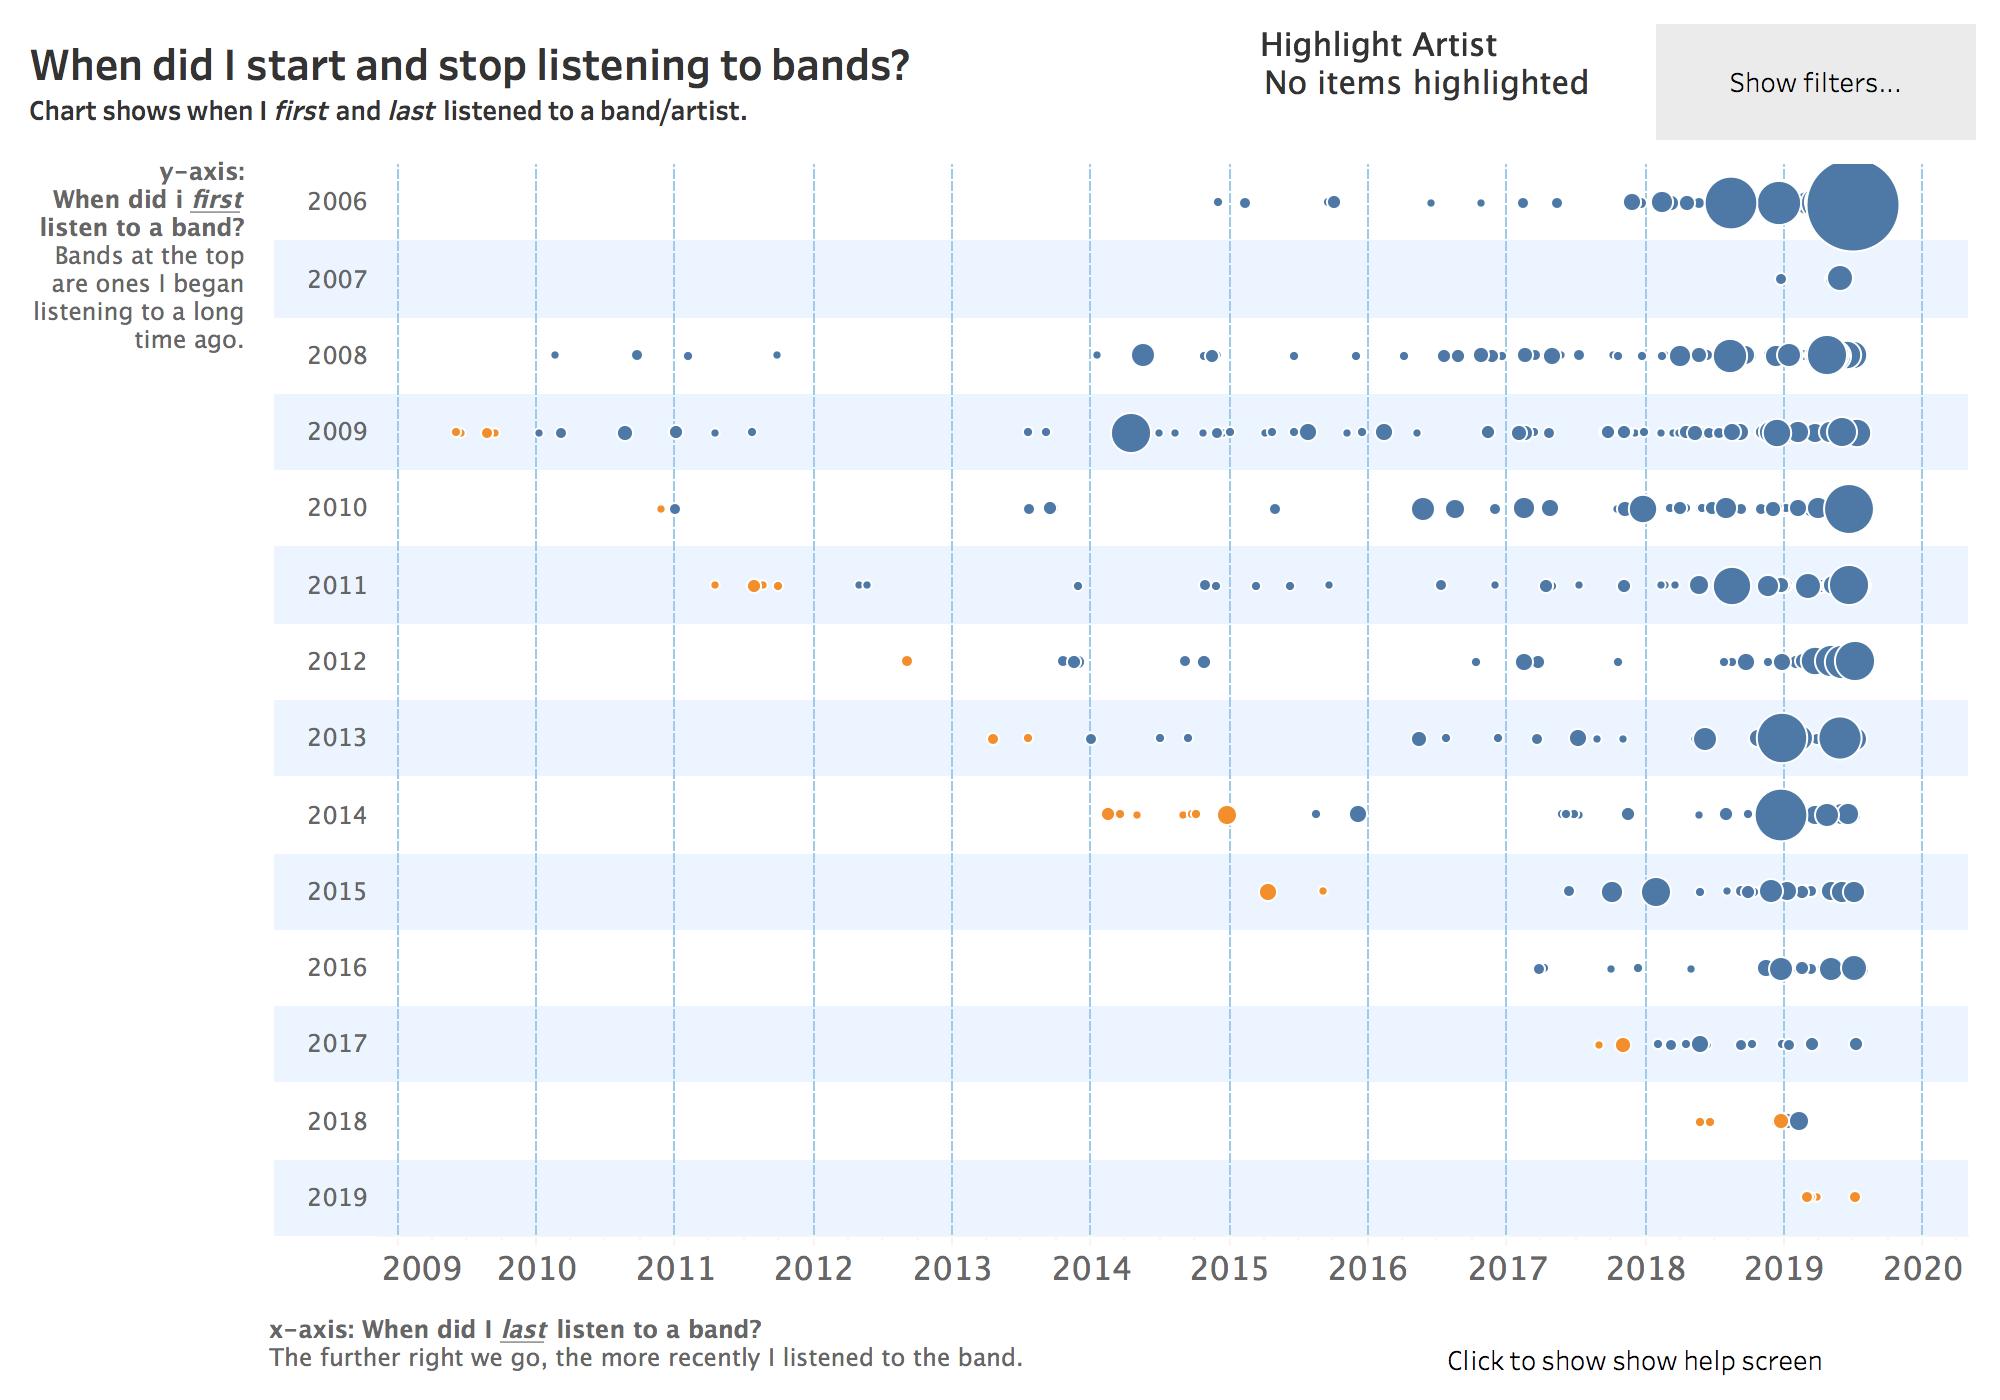 How Bohemian Rhapsody, Rocketman, and Yesterday affected andy cotgreave's last.fm scobbling data